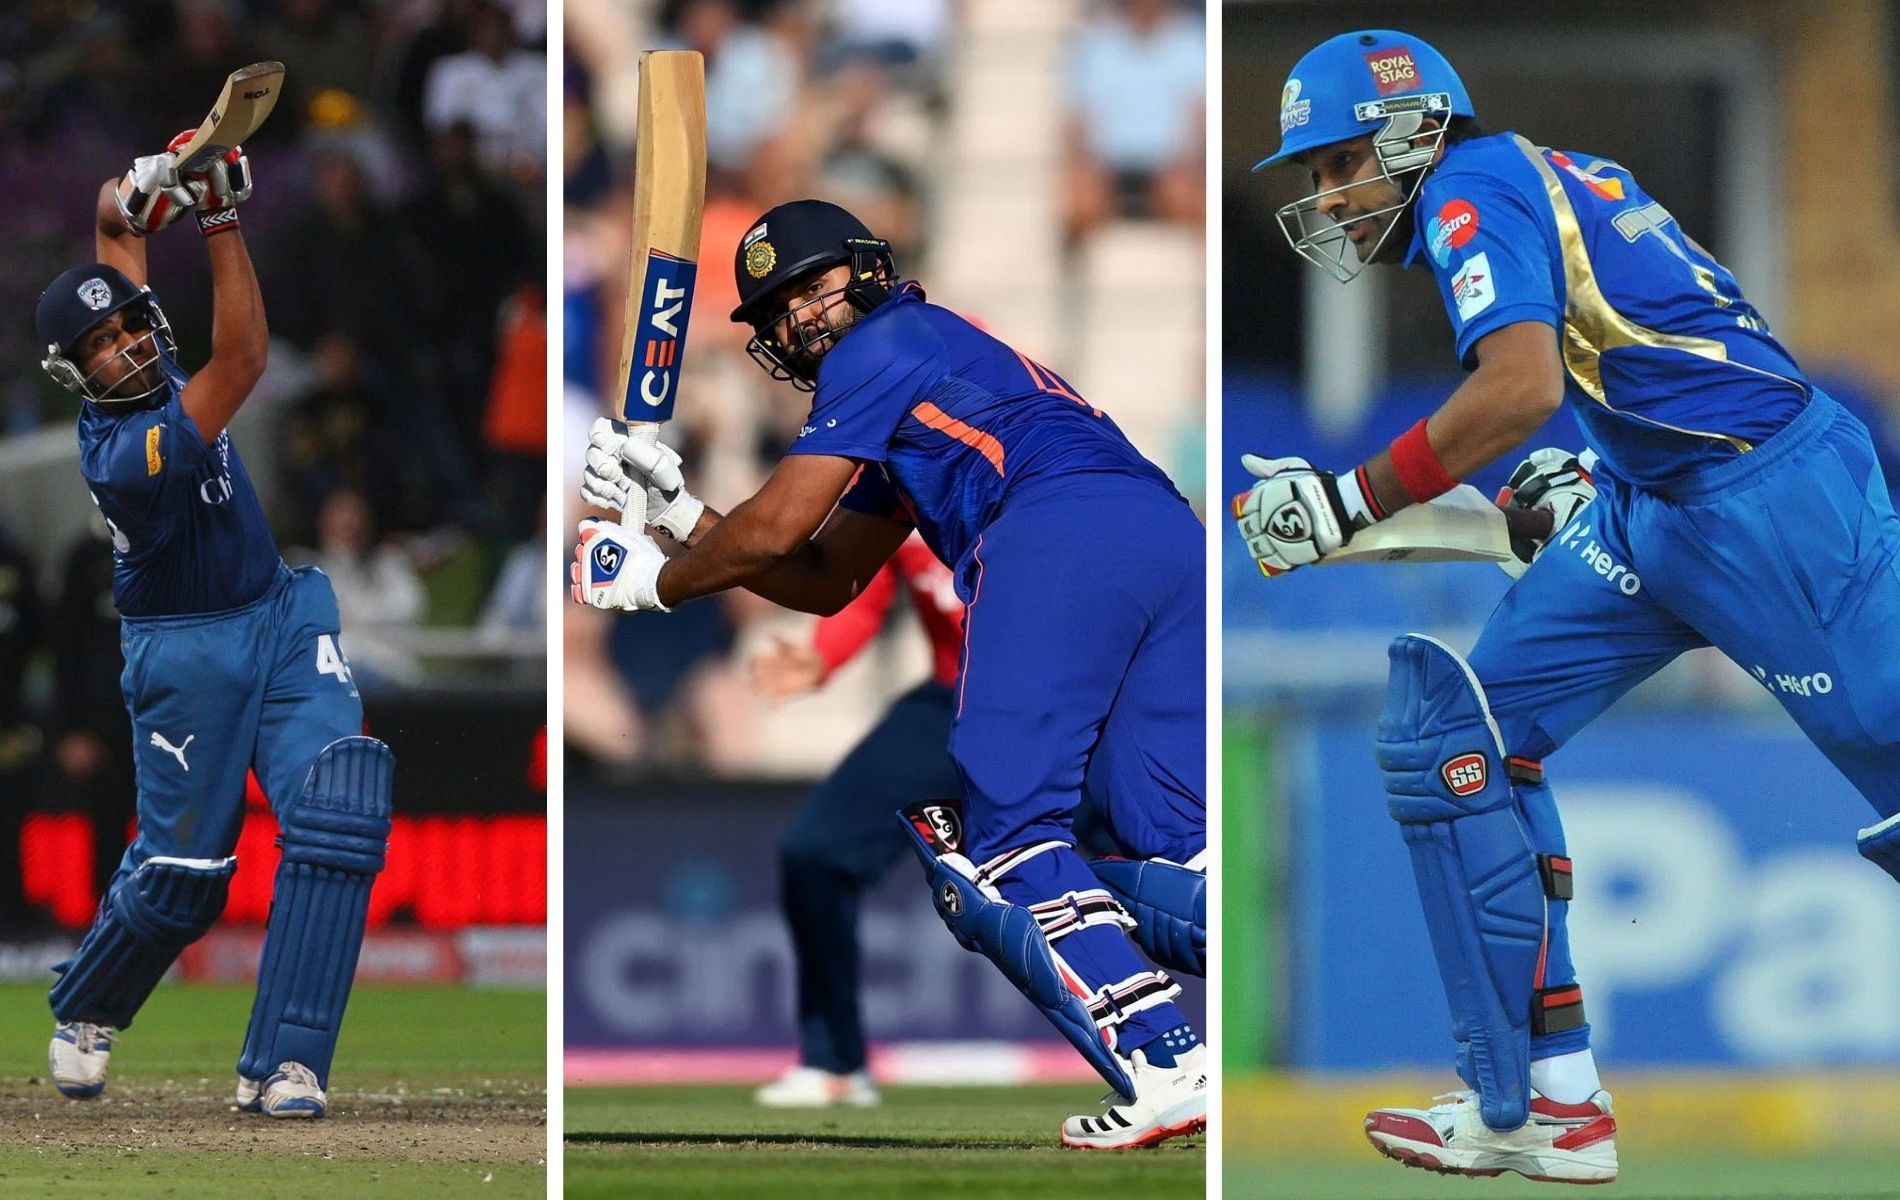 Apart from Team India, Rohit Sharma has also represented Deccan Chargers and Mumbai Indians. Pics: Getty Images